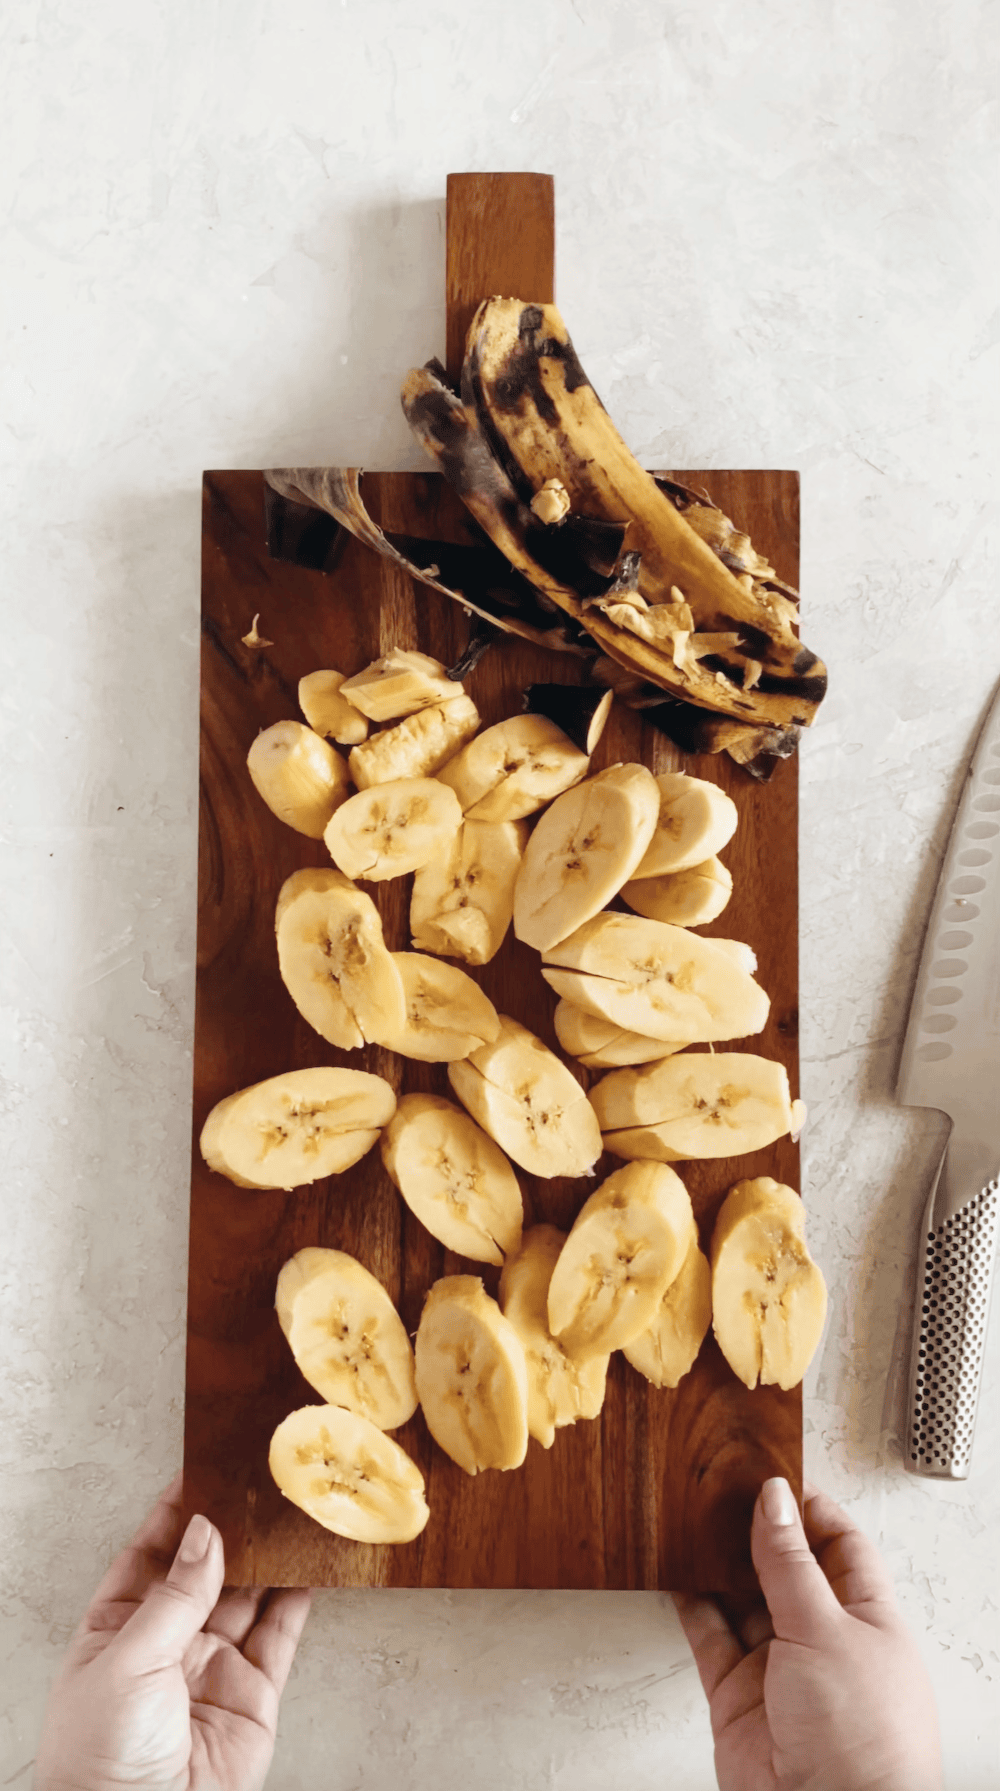 sliced ripe plantains on a wooden block ready for frying